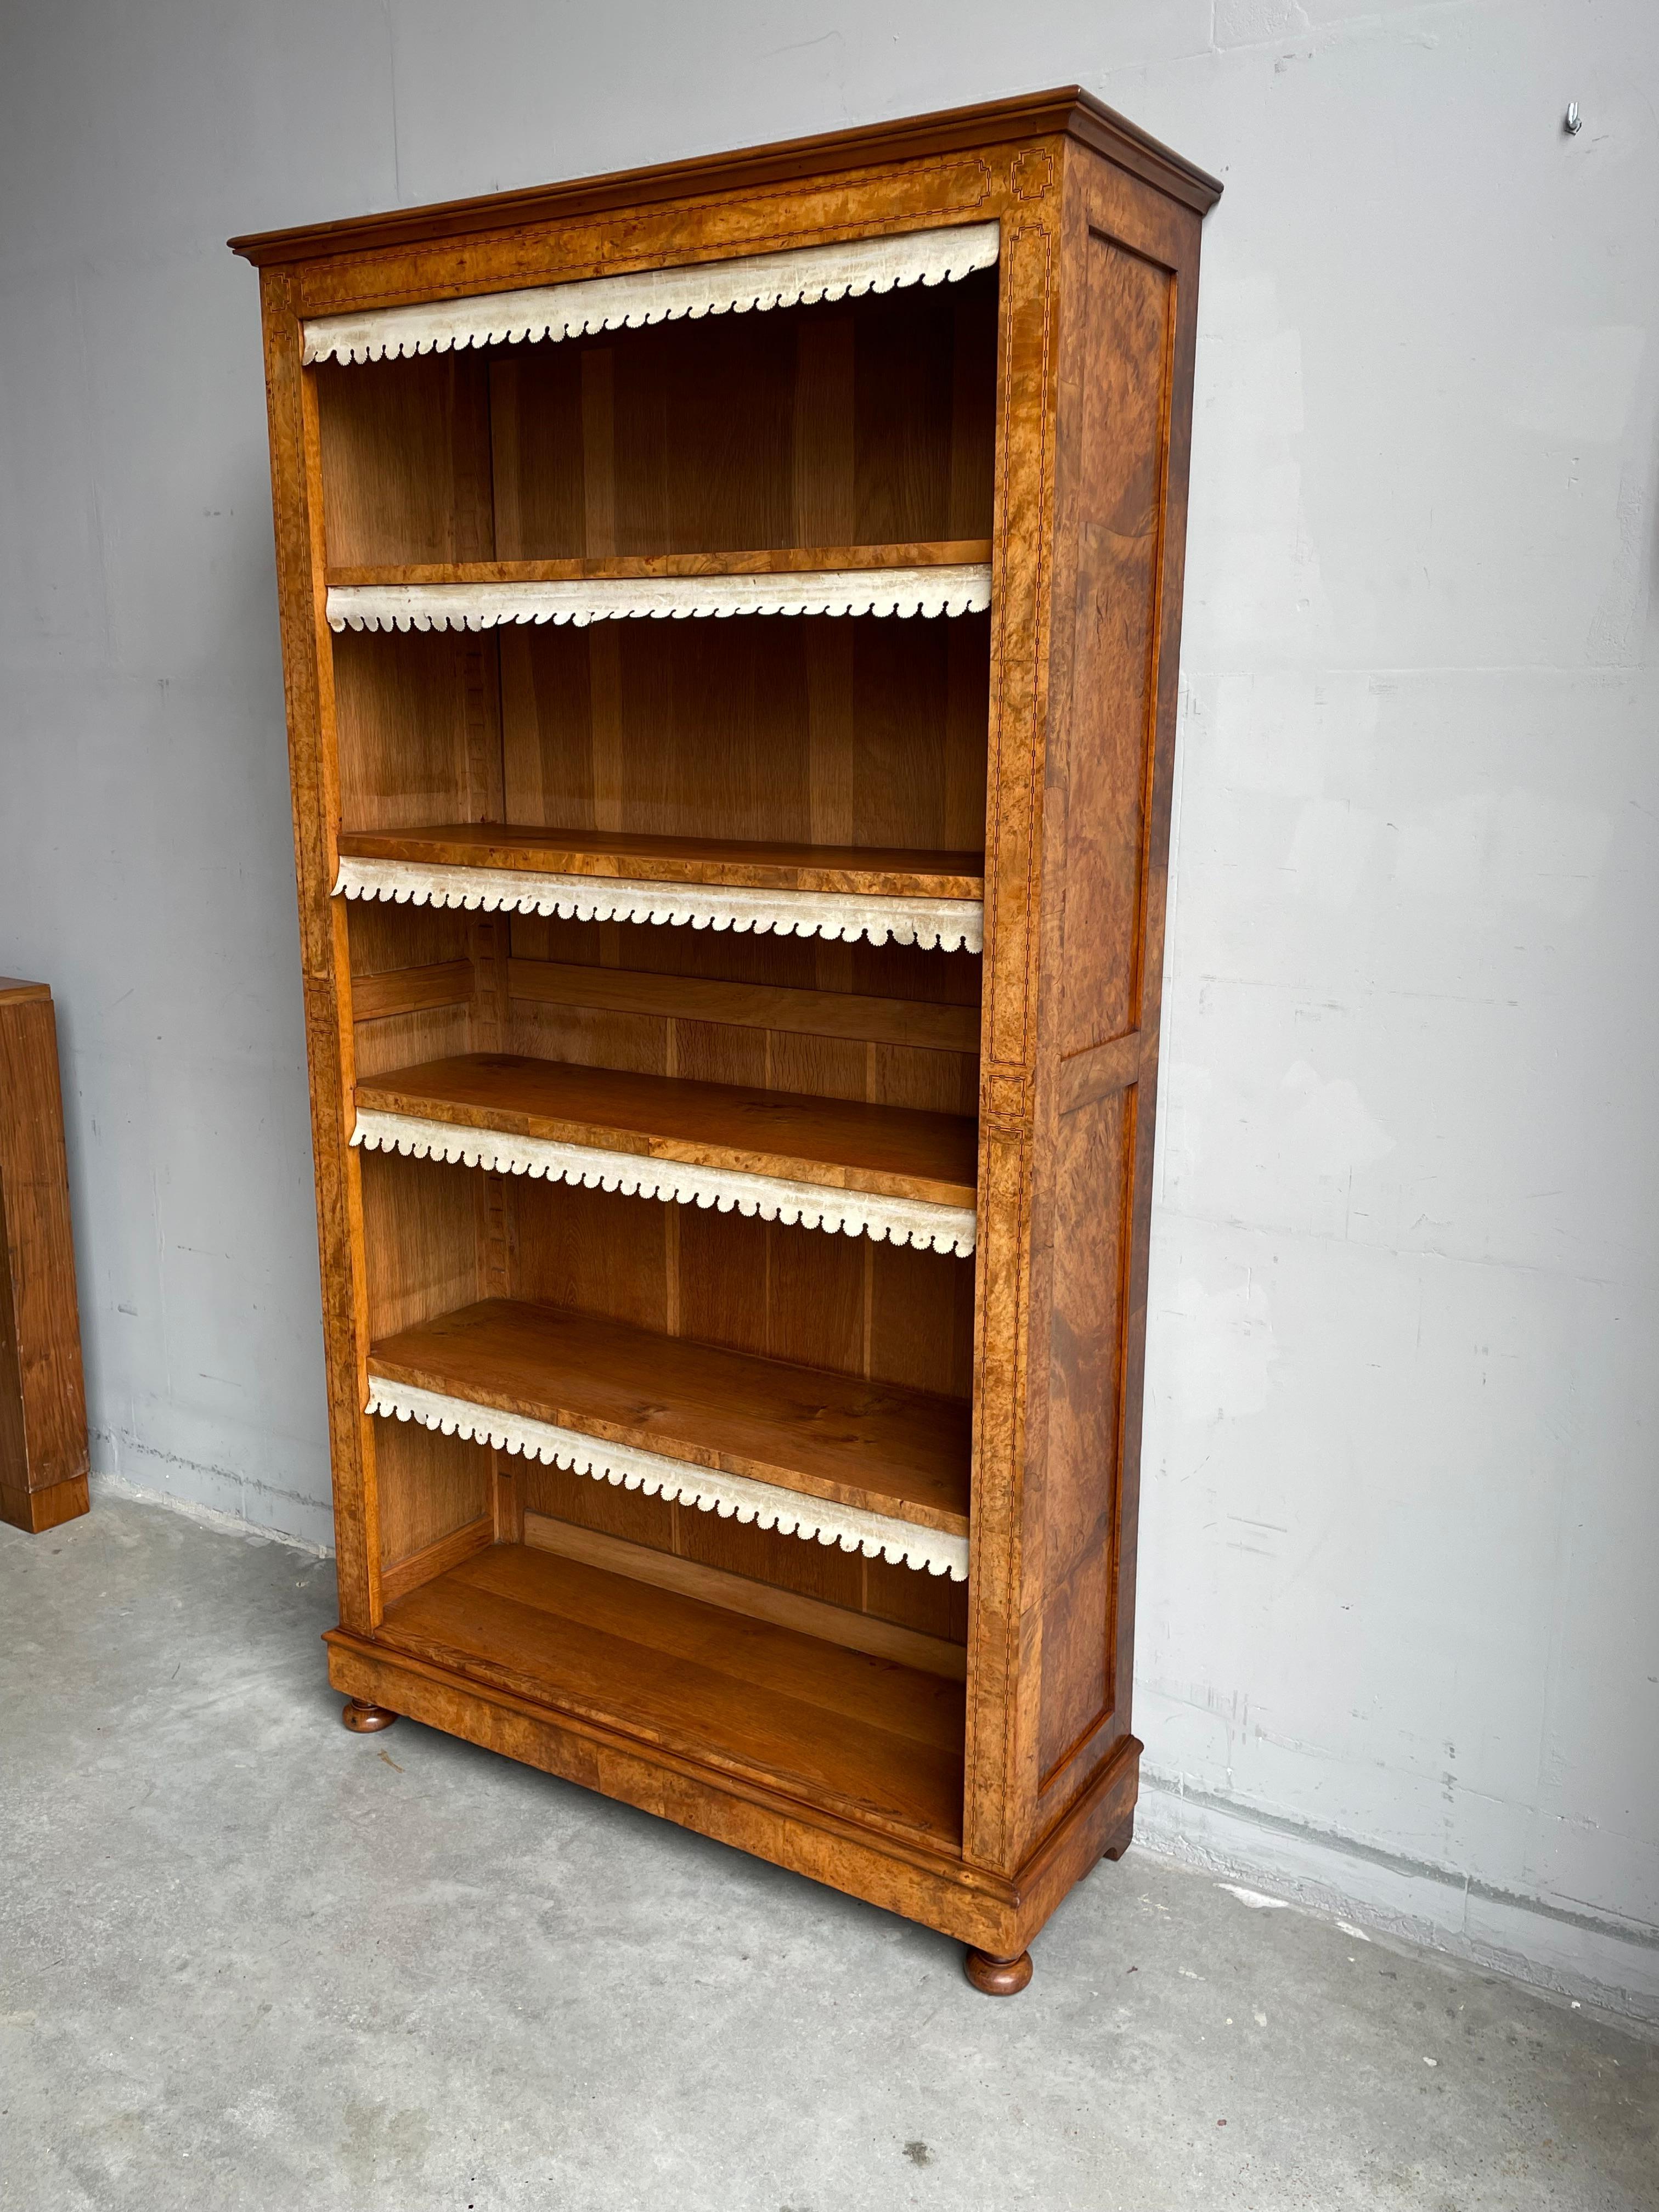 Late 1800s bookcase with height adjustable shelves.

If you are looking for a timeless and truly stylish antique bookcase then this rare specimen could be perfect for your room or office. It is beautifully handcrafted in the 1890s, it is practical